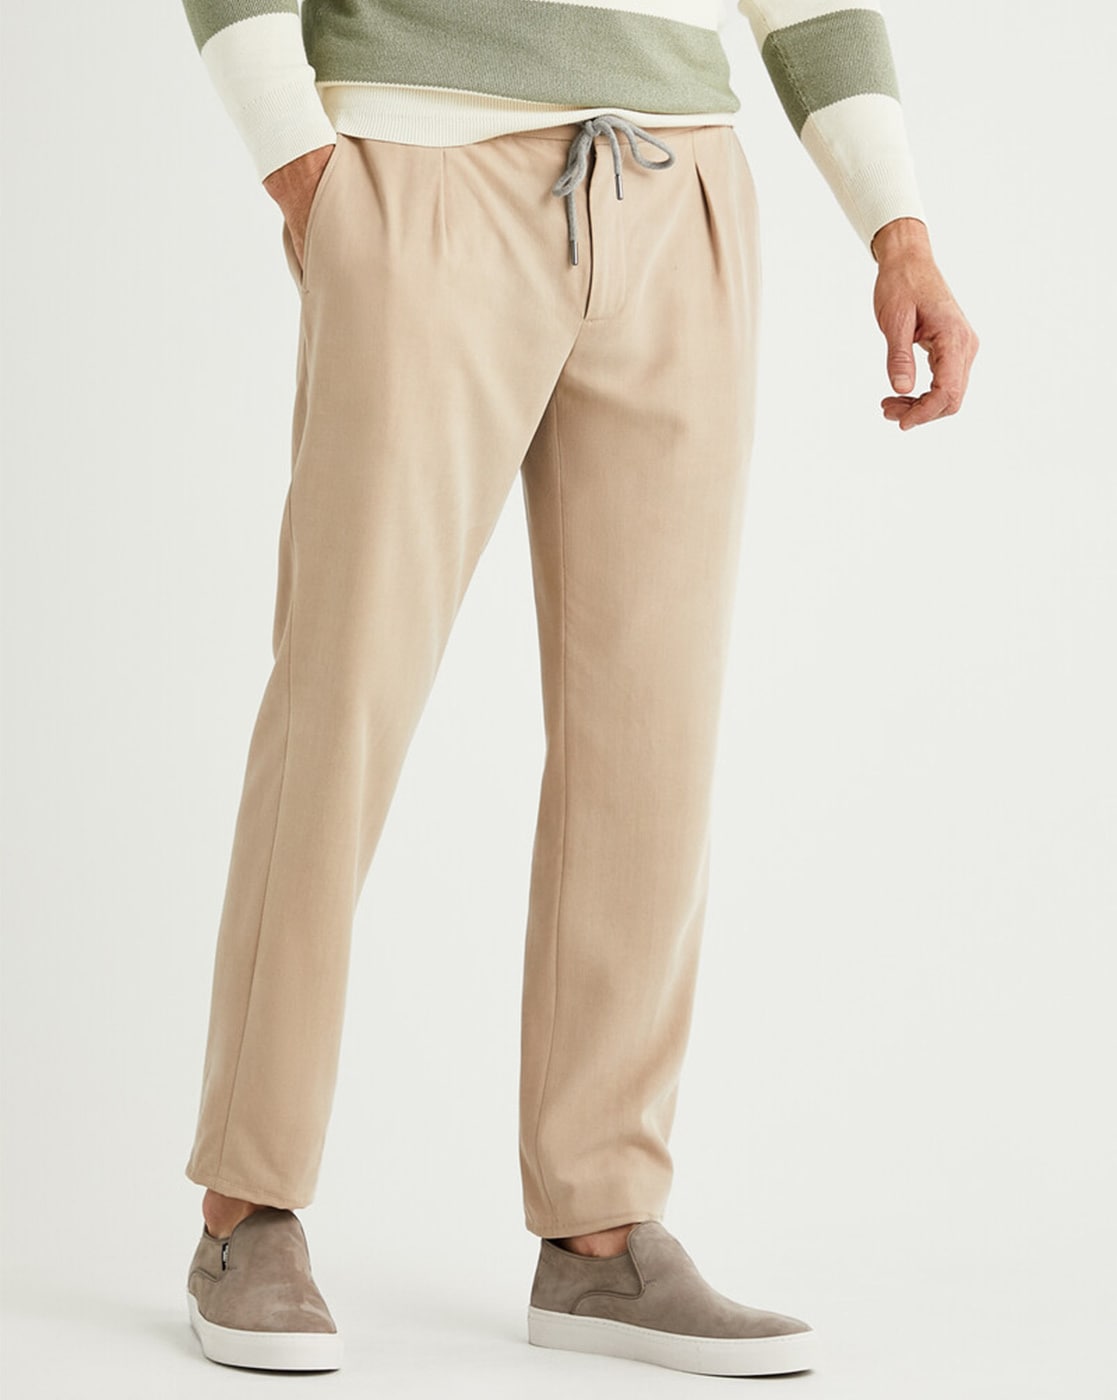 BASICS TAPERED FIT SKYRIDE BLUE COTTON STRETCH TROUSERS-23BTR50203